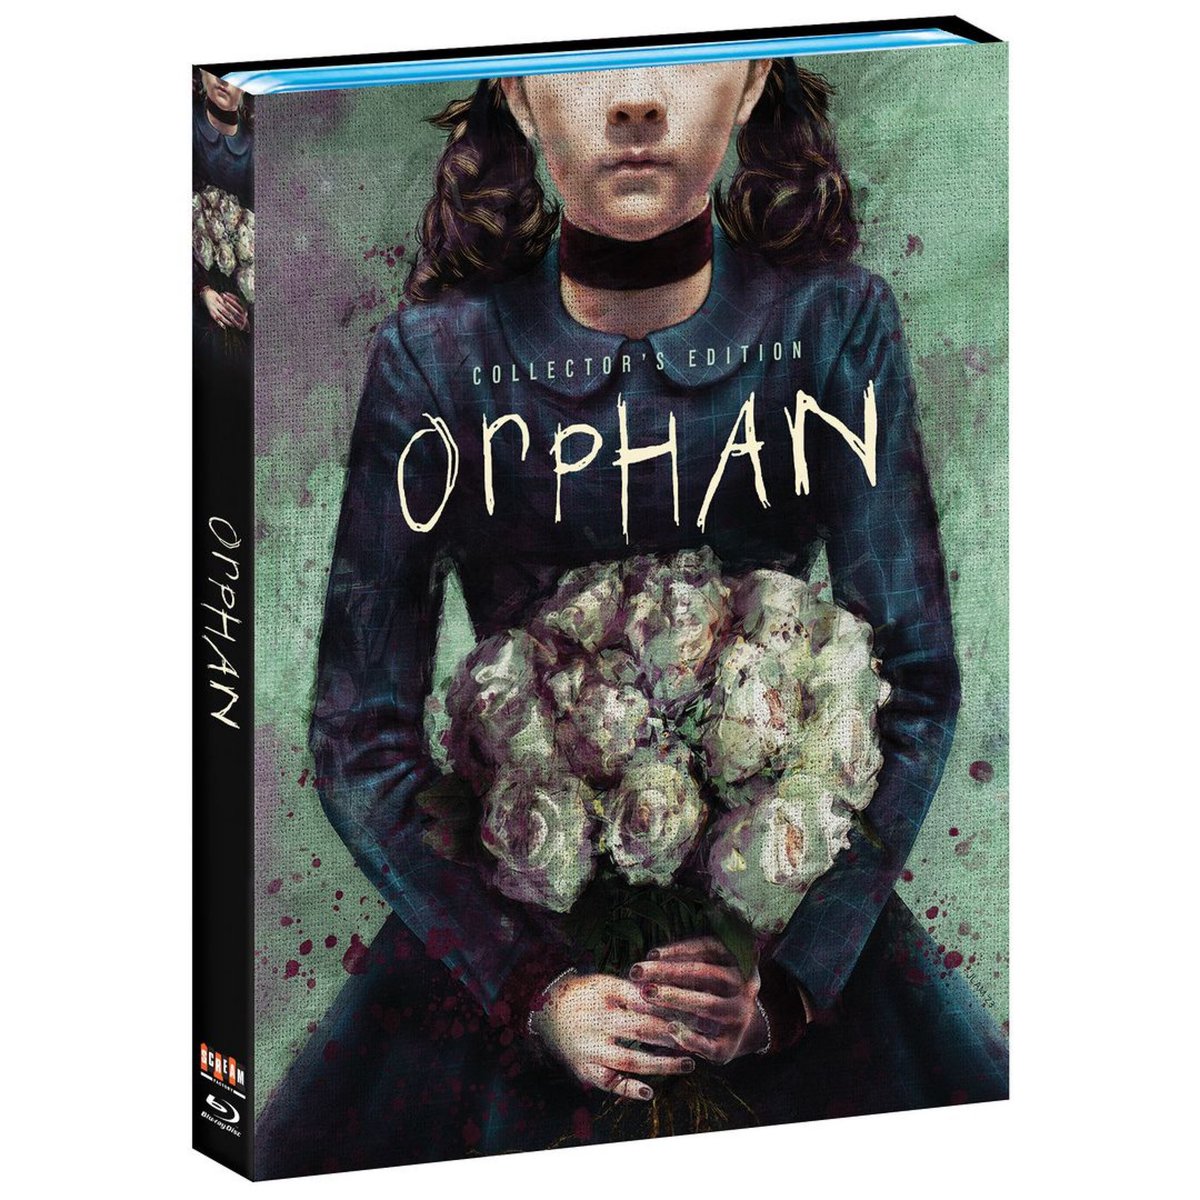 Bring Esther home when ORPHAN hits Blu-ray May 14. The angelic Esther (#IsabelleFuhrman, The Hunger Games) is taken in by the loving Kate (#VeraFarmiga, The Departed) and John (#PeterSarsgaard, The Batman) in the twisty thriller.

❗️Order from ShoutFactory.com‼️